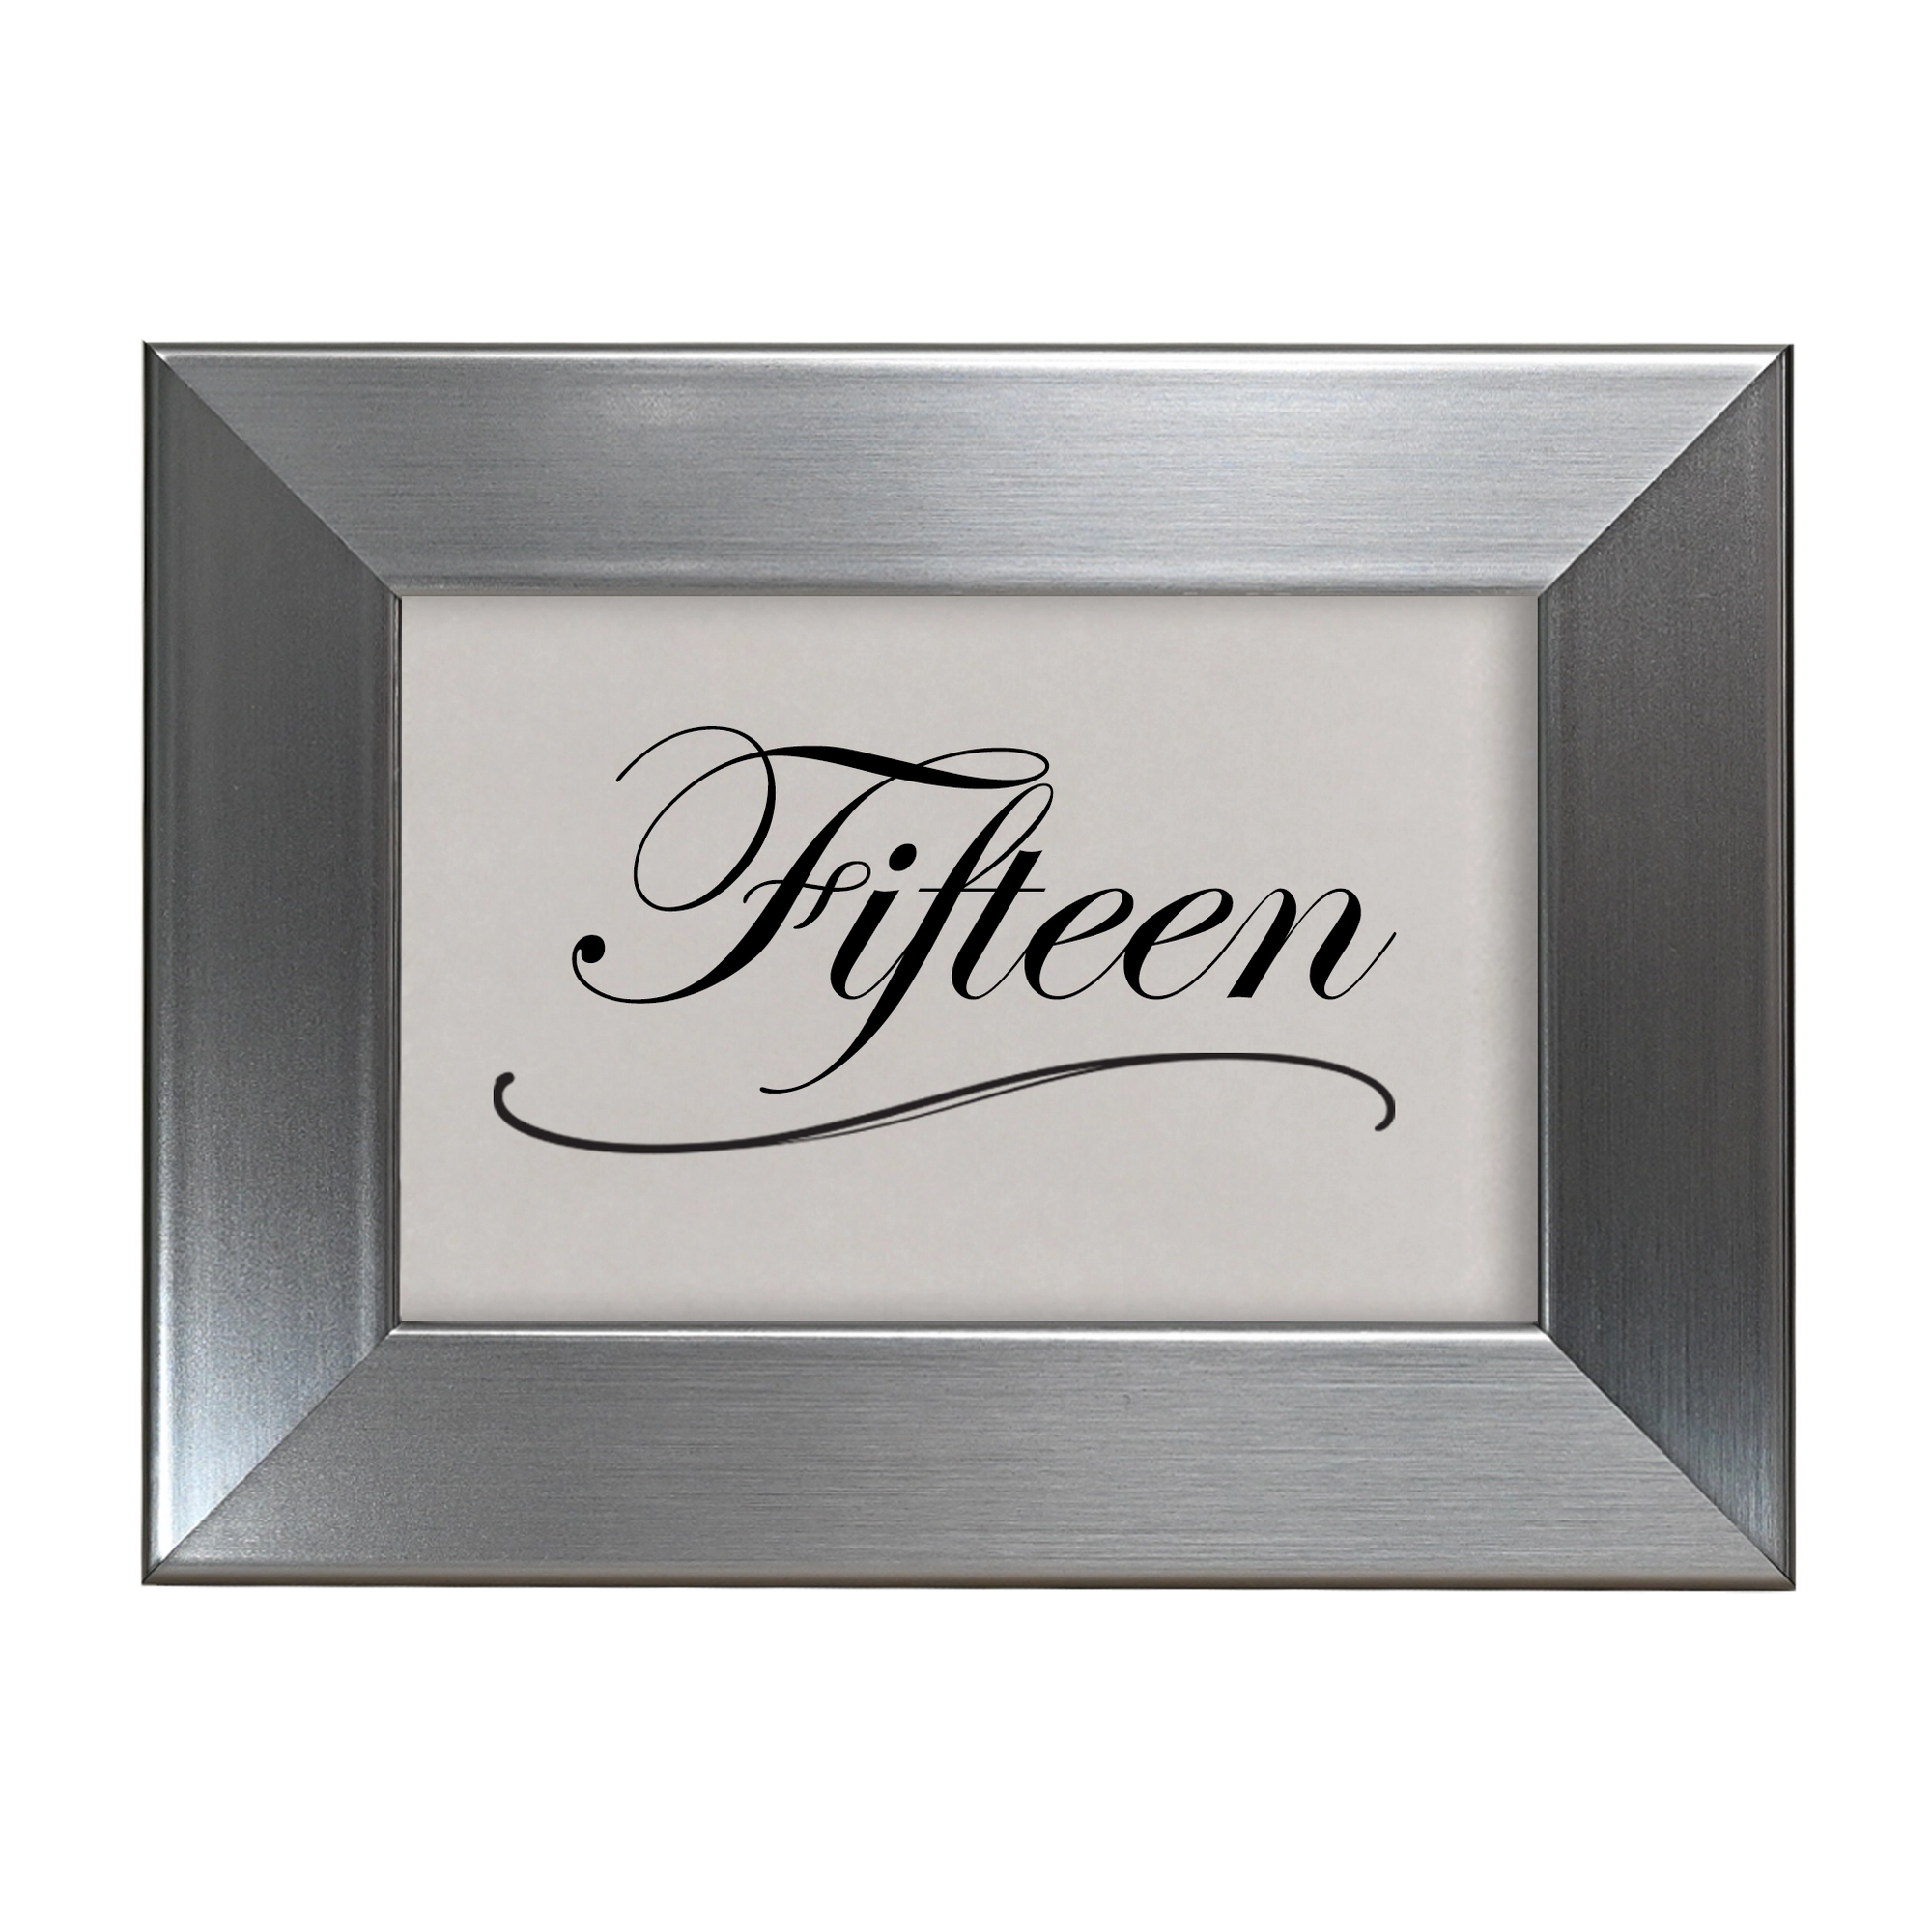 Architectural Stainless Steel Table Number Frame